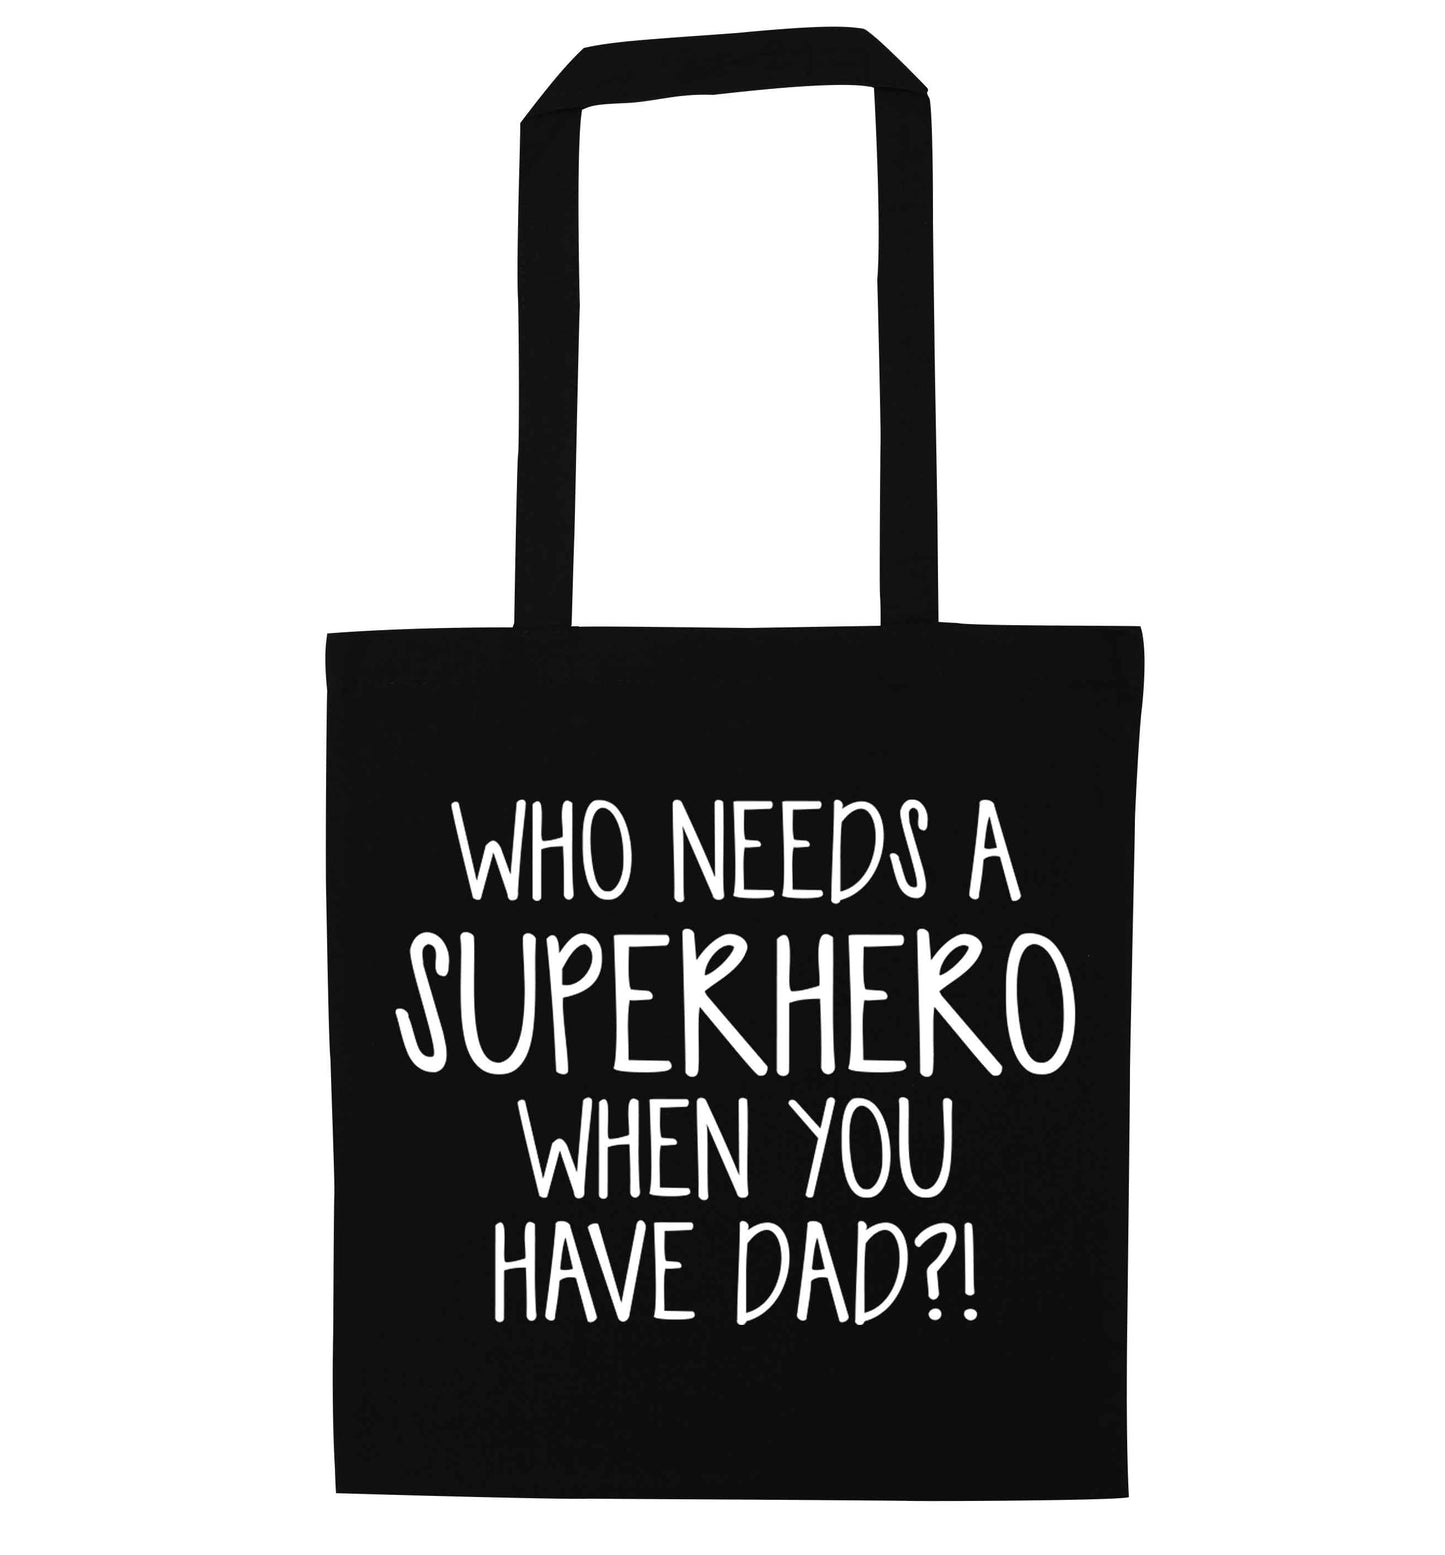 Who needs a superhero when you have dad! black tote bag